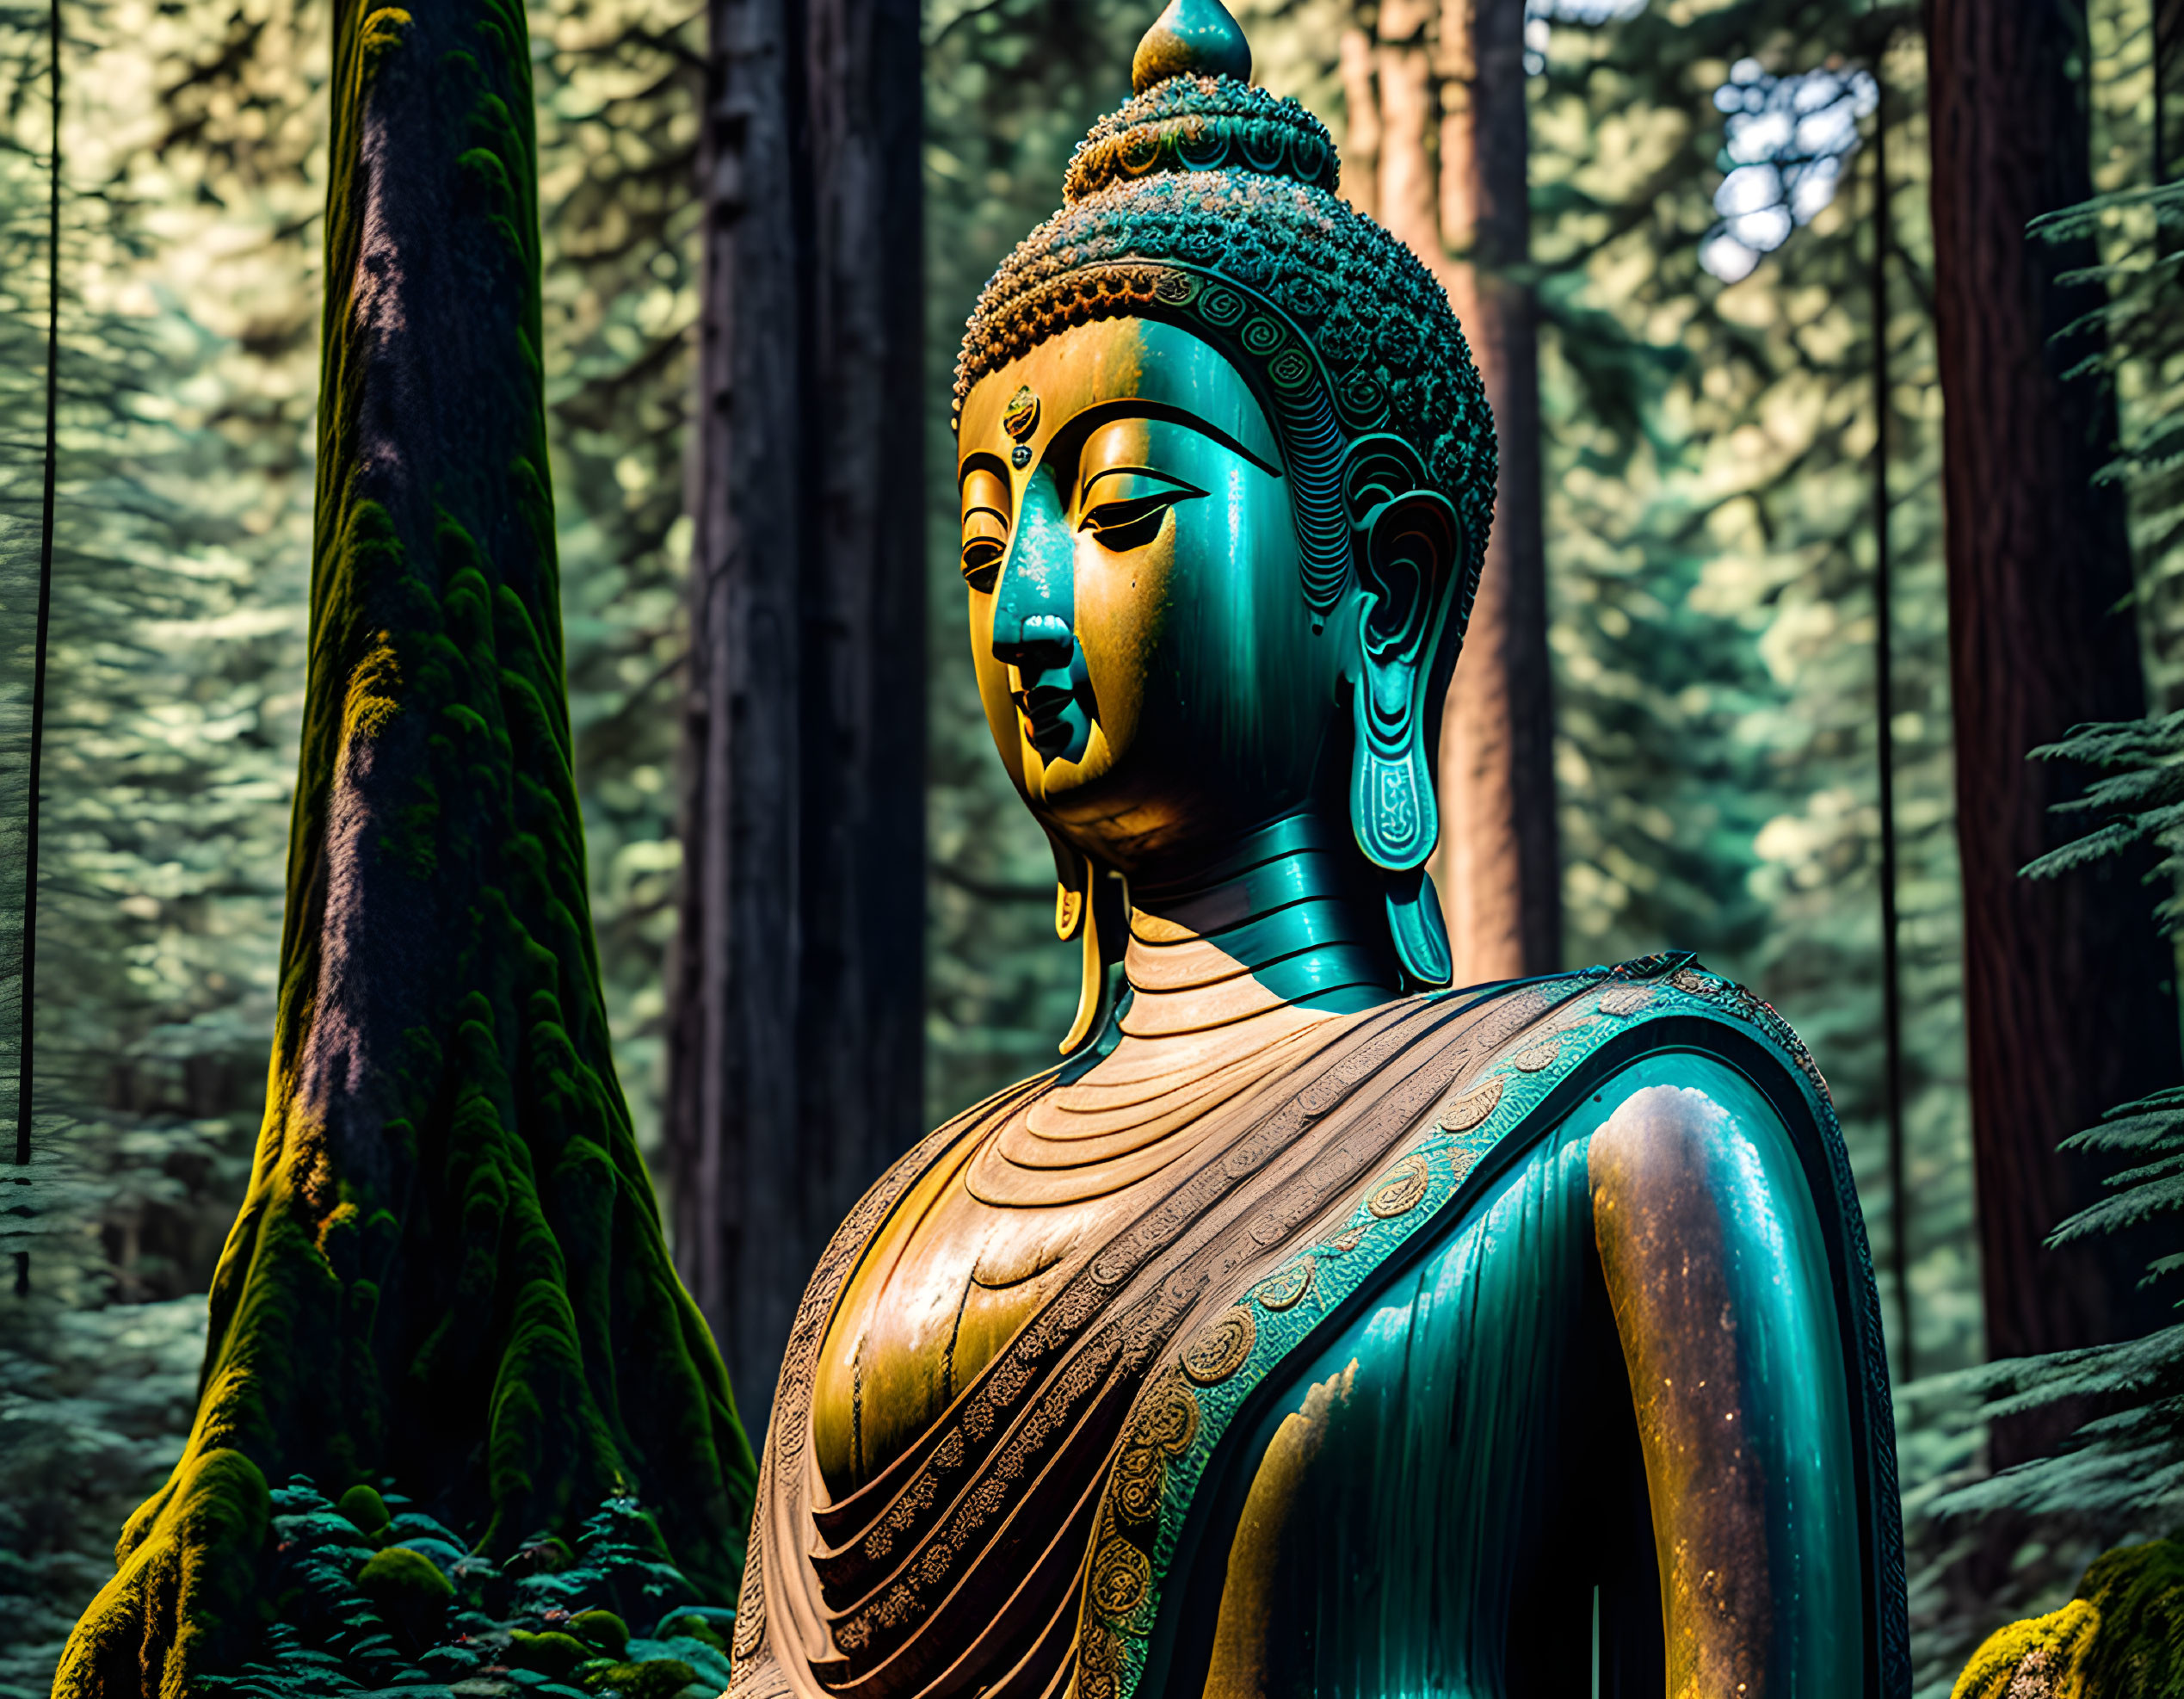 Tranquil forest scene with serene Buddha statue